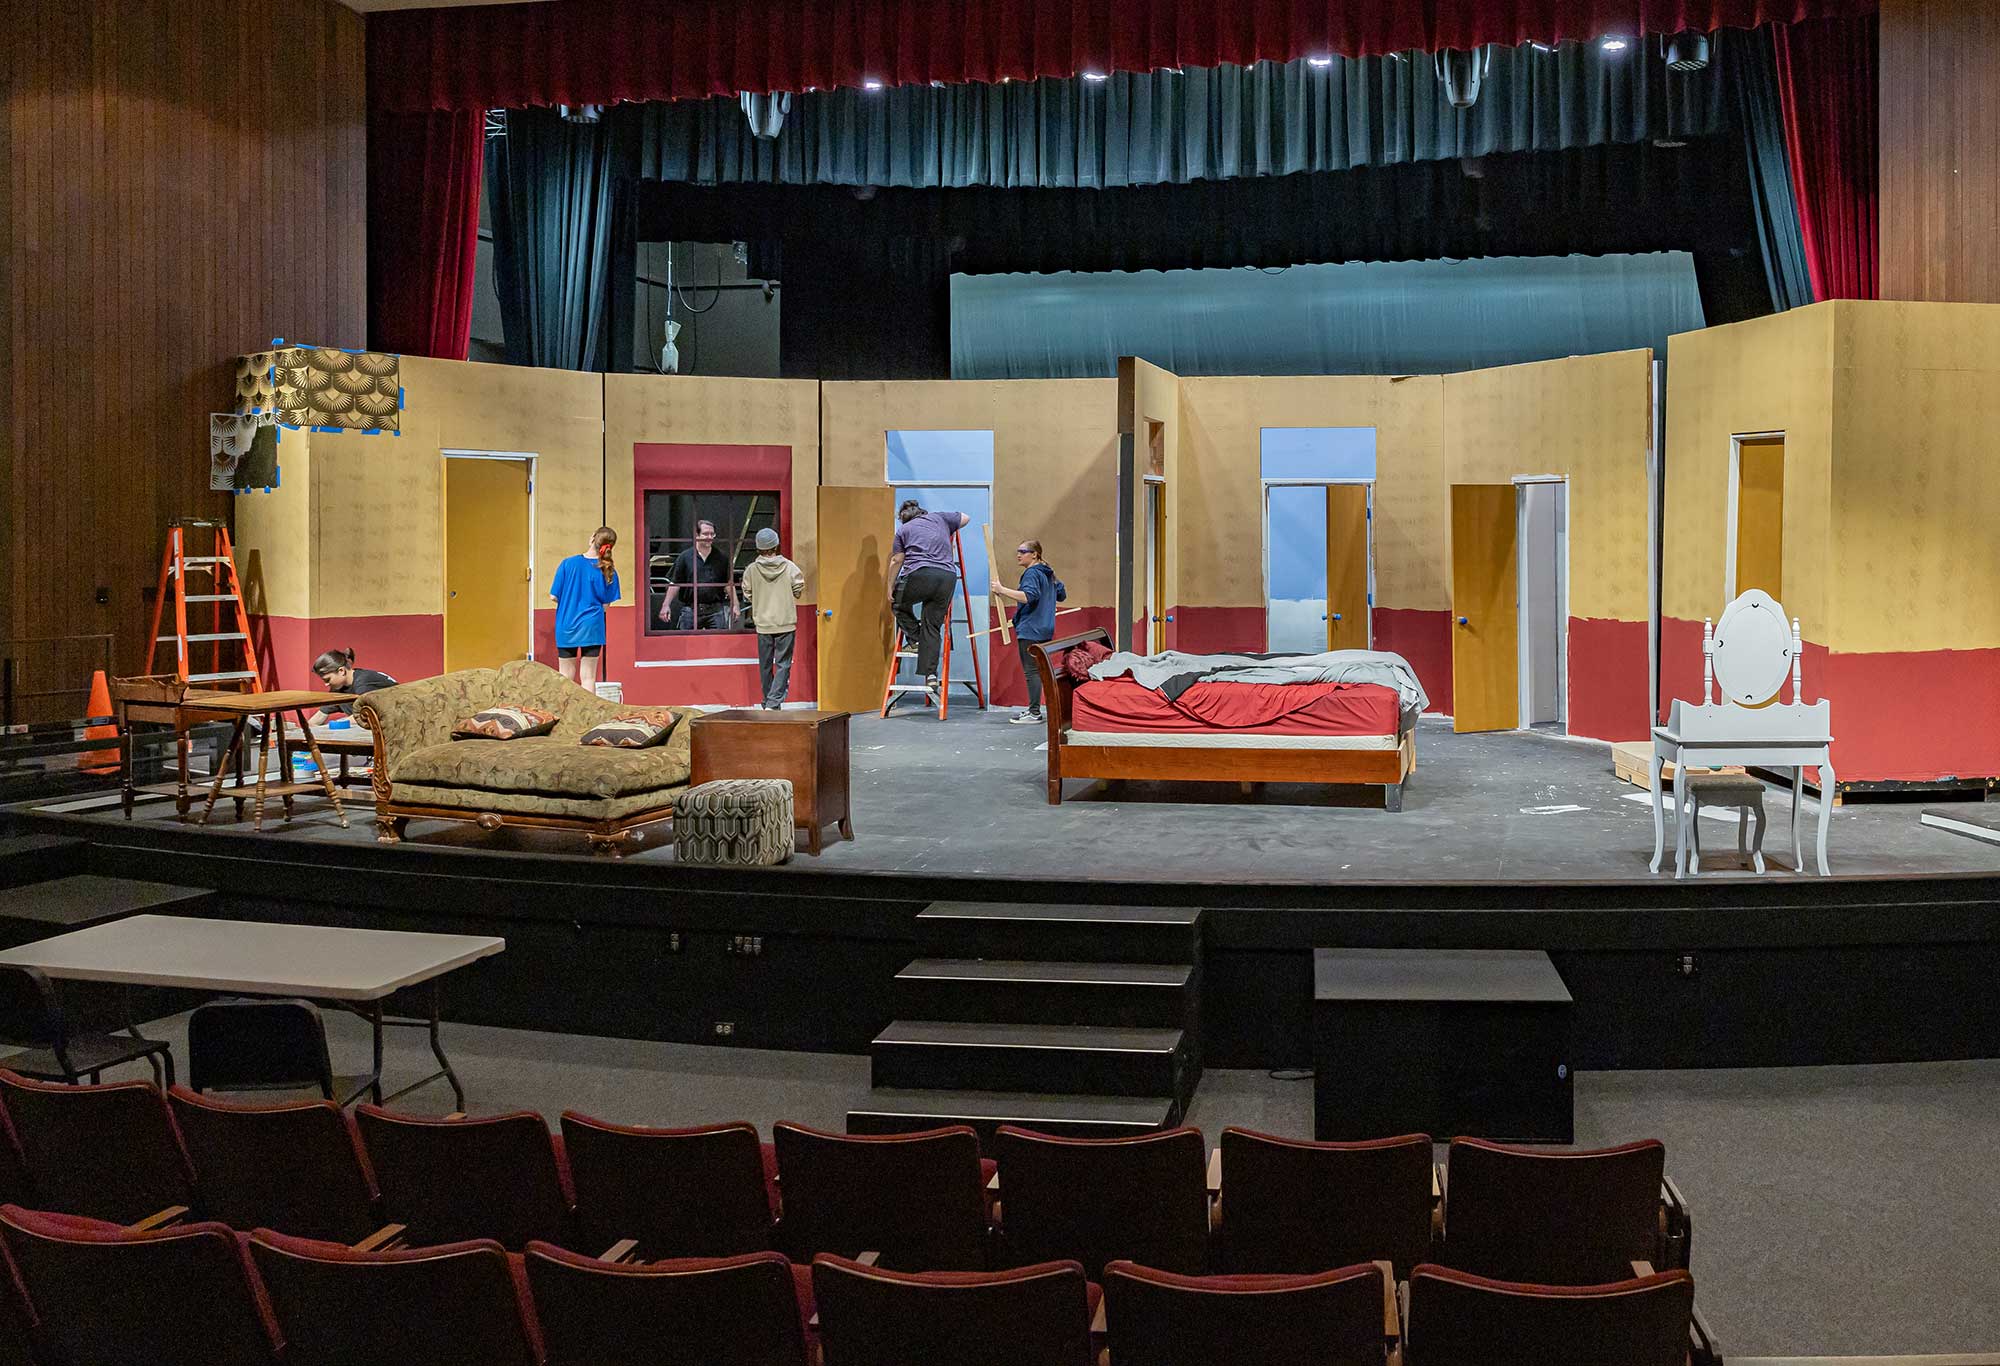 Students building stage set for Lend Me a Tenor production